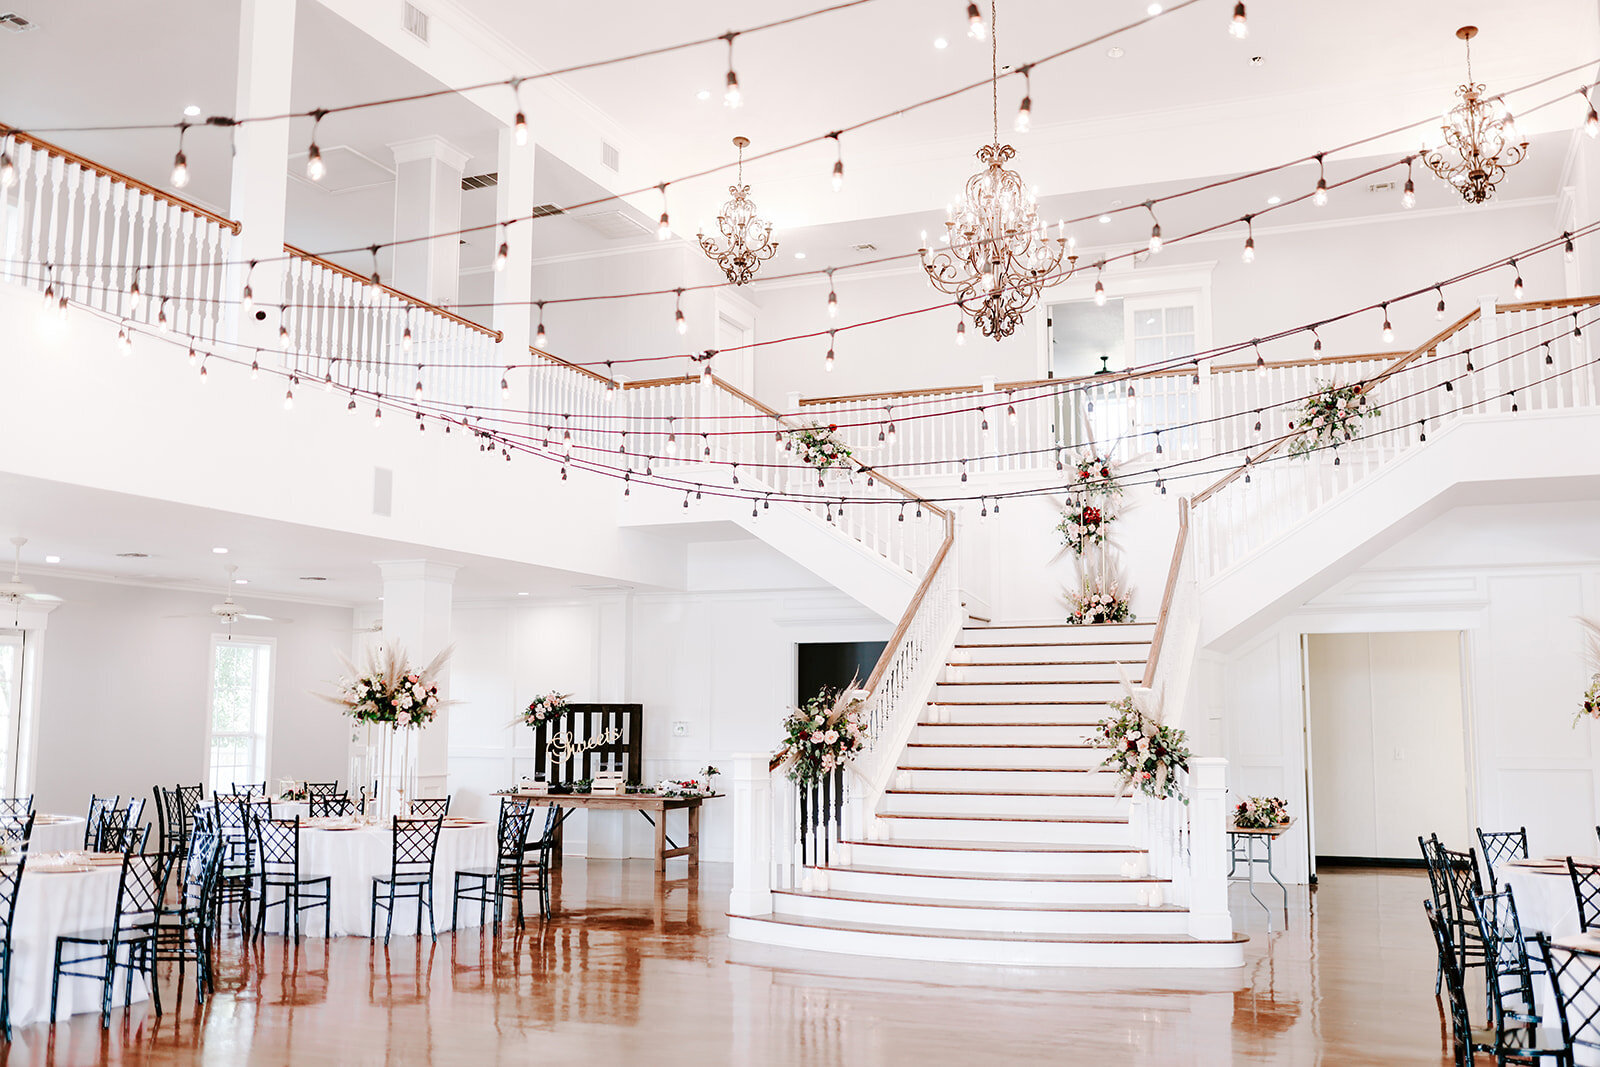 The view of the Kendall Point grand staircase before a reception.